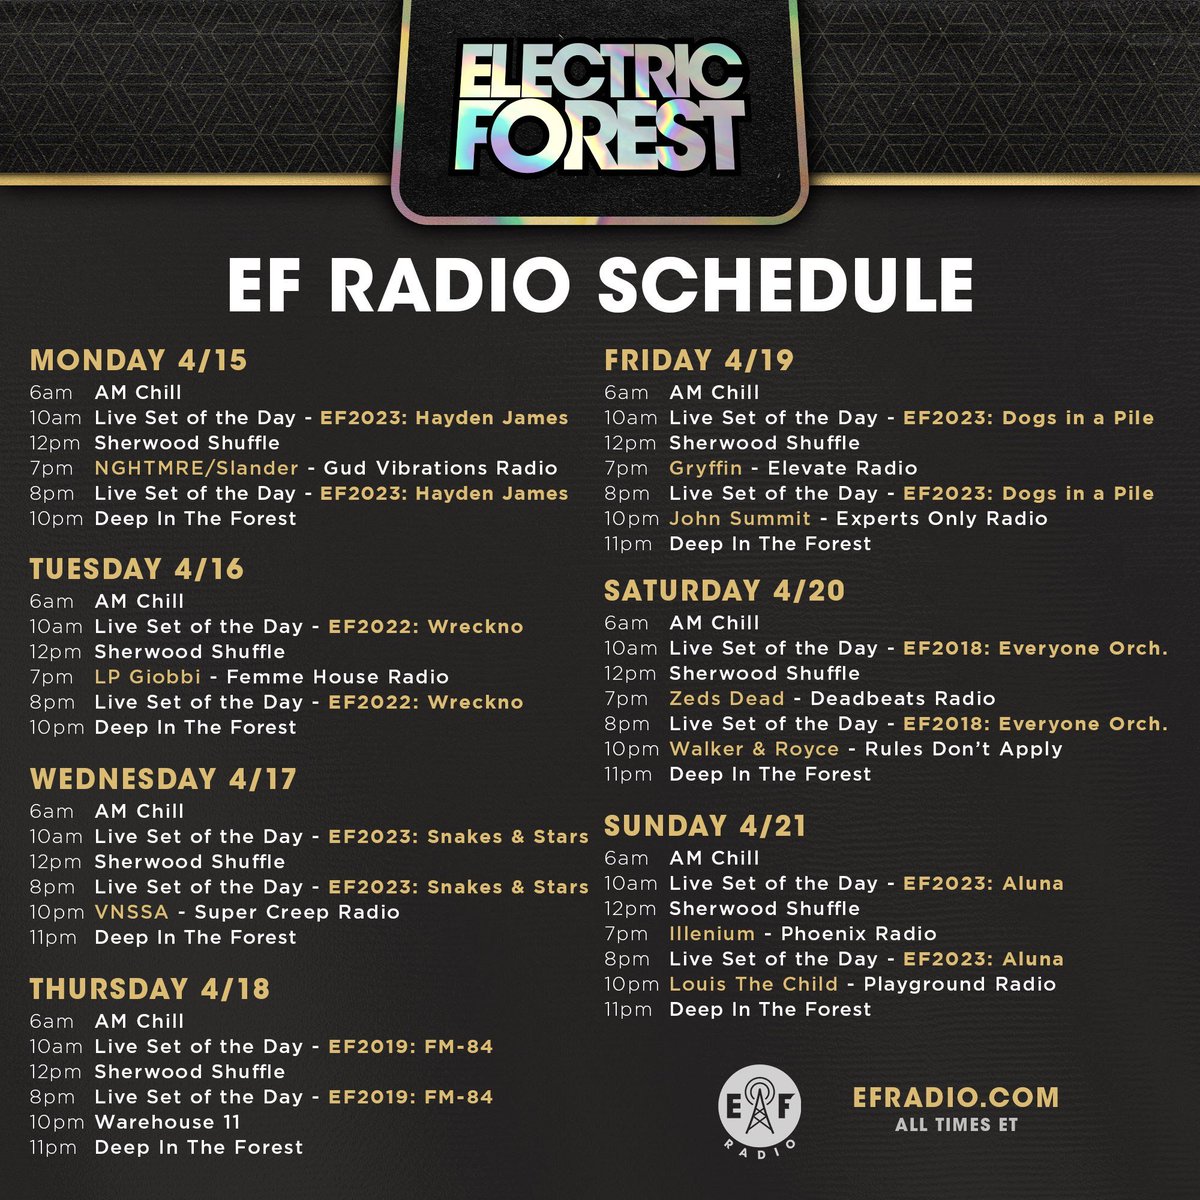 This week on @EForestRadio! 📻🌲 Tune in for #EF2023 performances from @wreckno, @alunaaa and others, as well as daily broadcasts of the AM Chill and Sherwood Shuffle, and so much more. Hear it 24/7/365 at EFRadio.com, in the Mobile App, or on Discord!